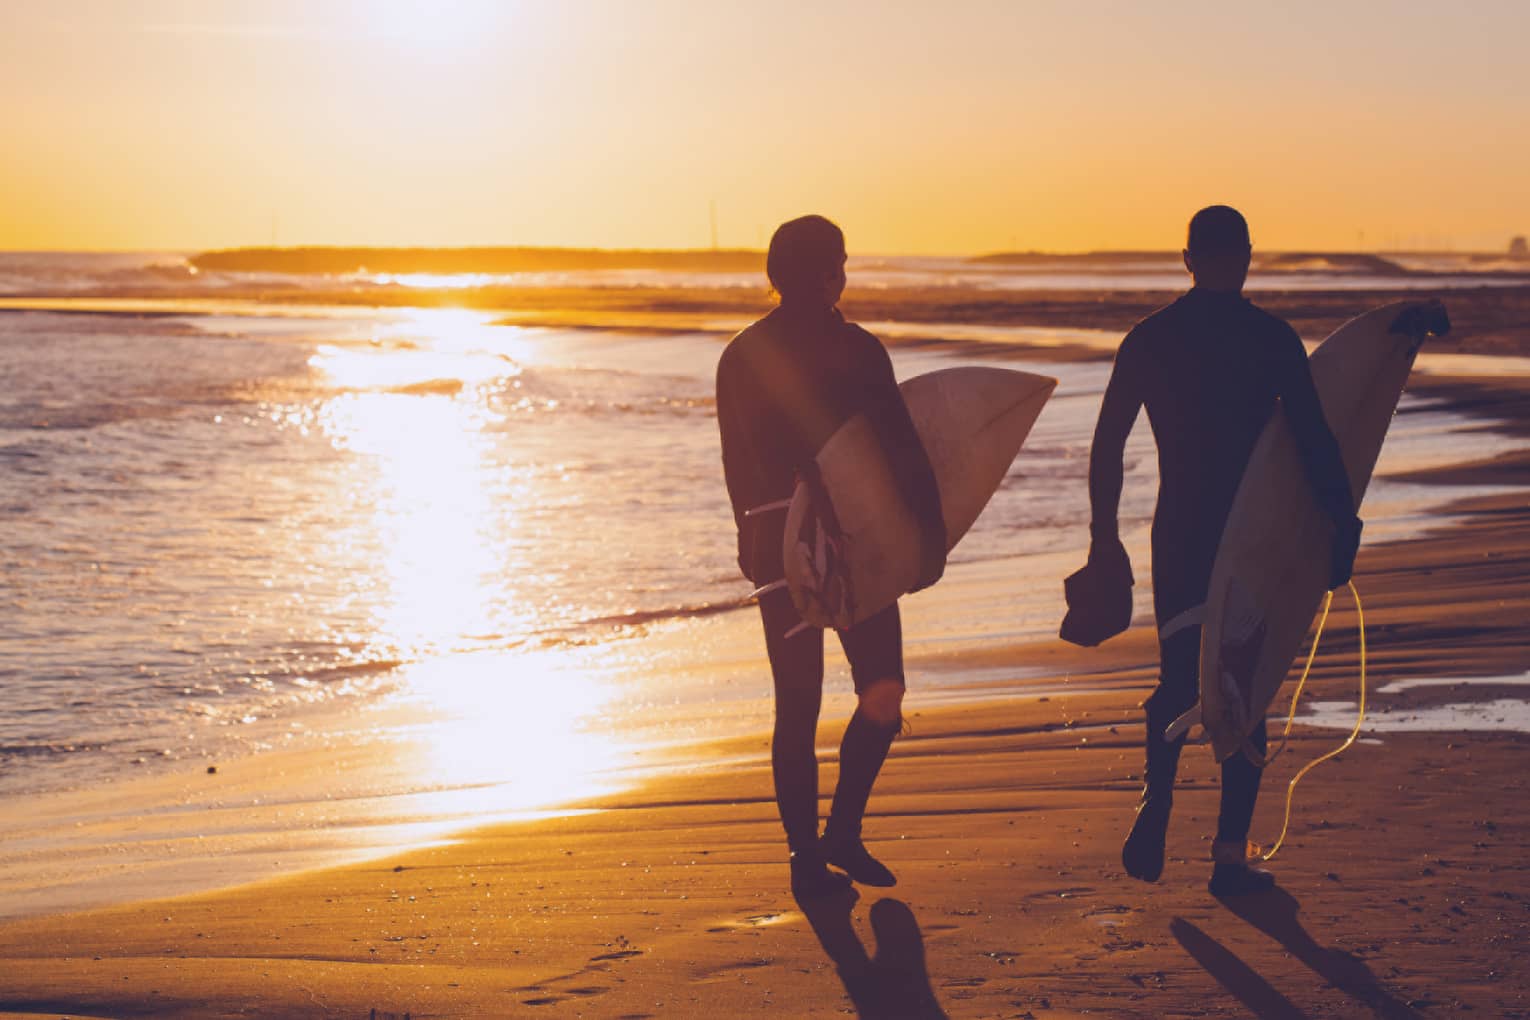 Silhouettes of two people carrying surfboards across beach at sunset